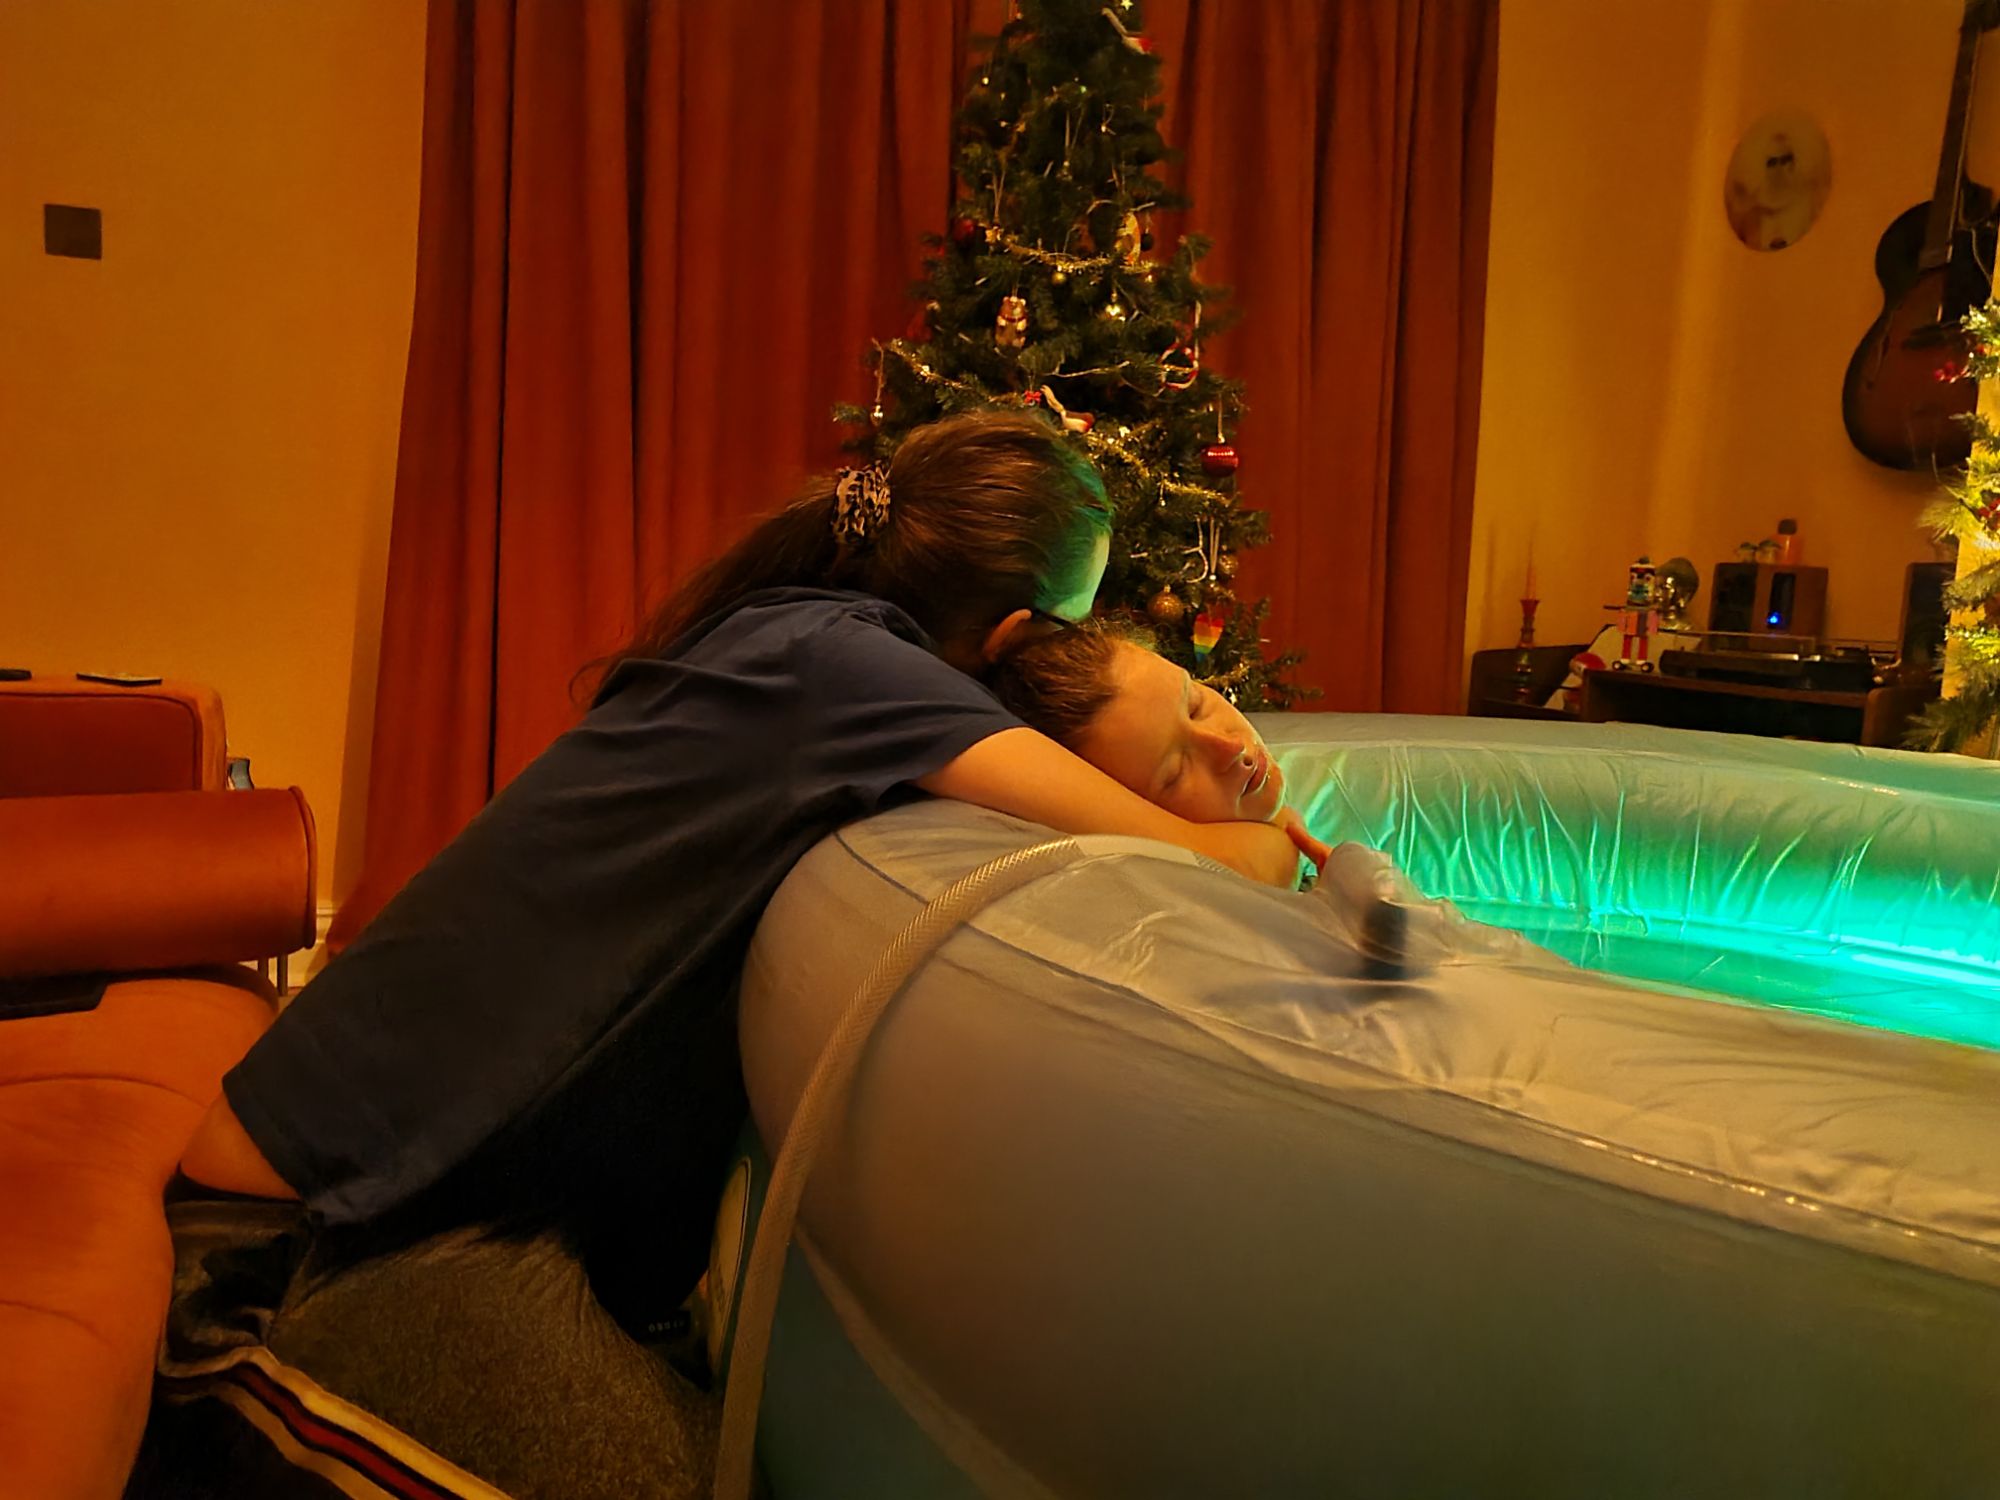 Image of a woman reclining back in a pool, with her partner hugging her from behind over the edge of the pool. There is a Christmas tree in the background.